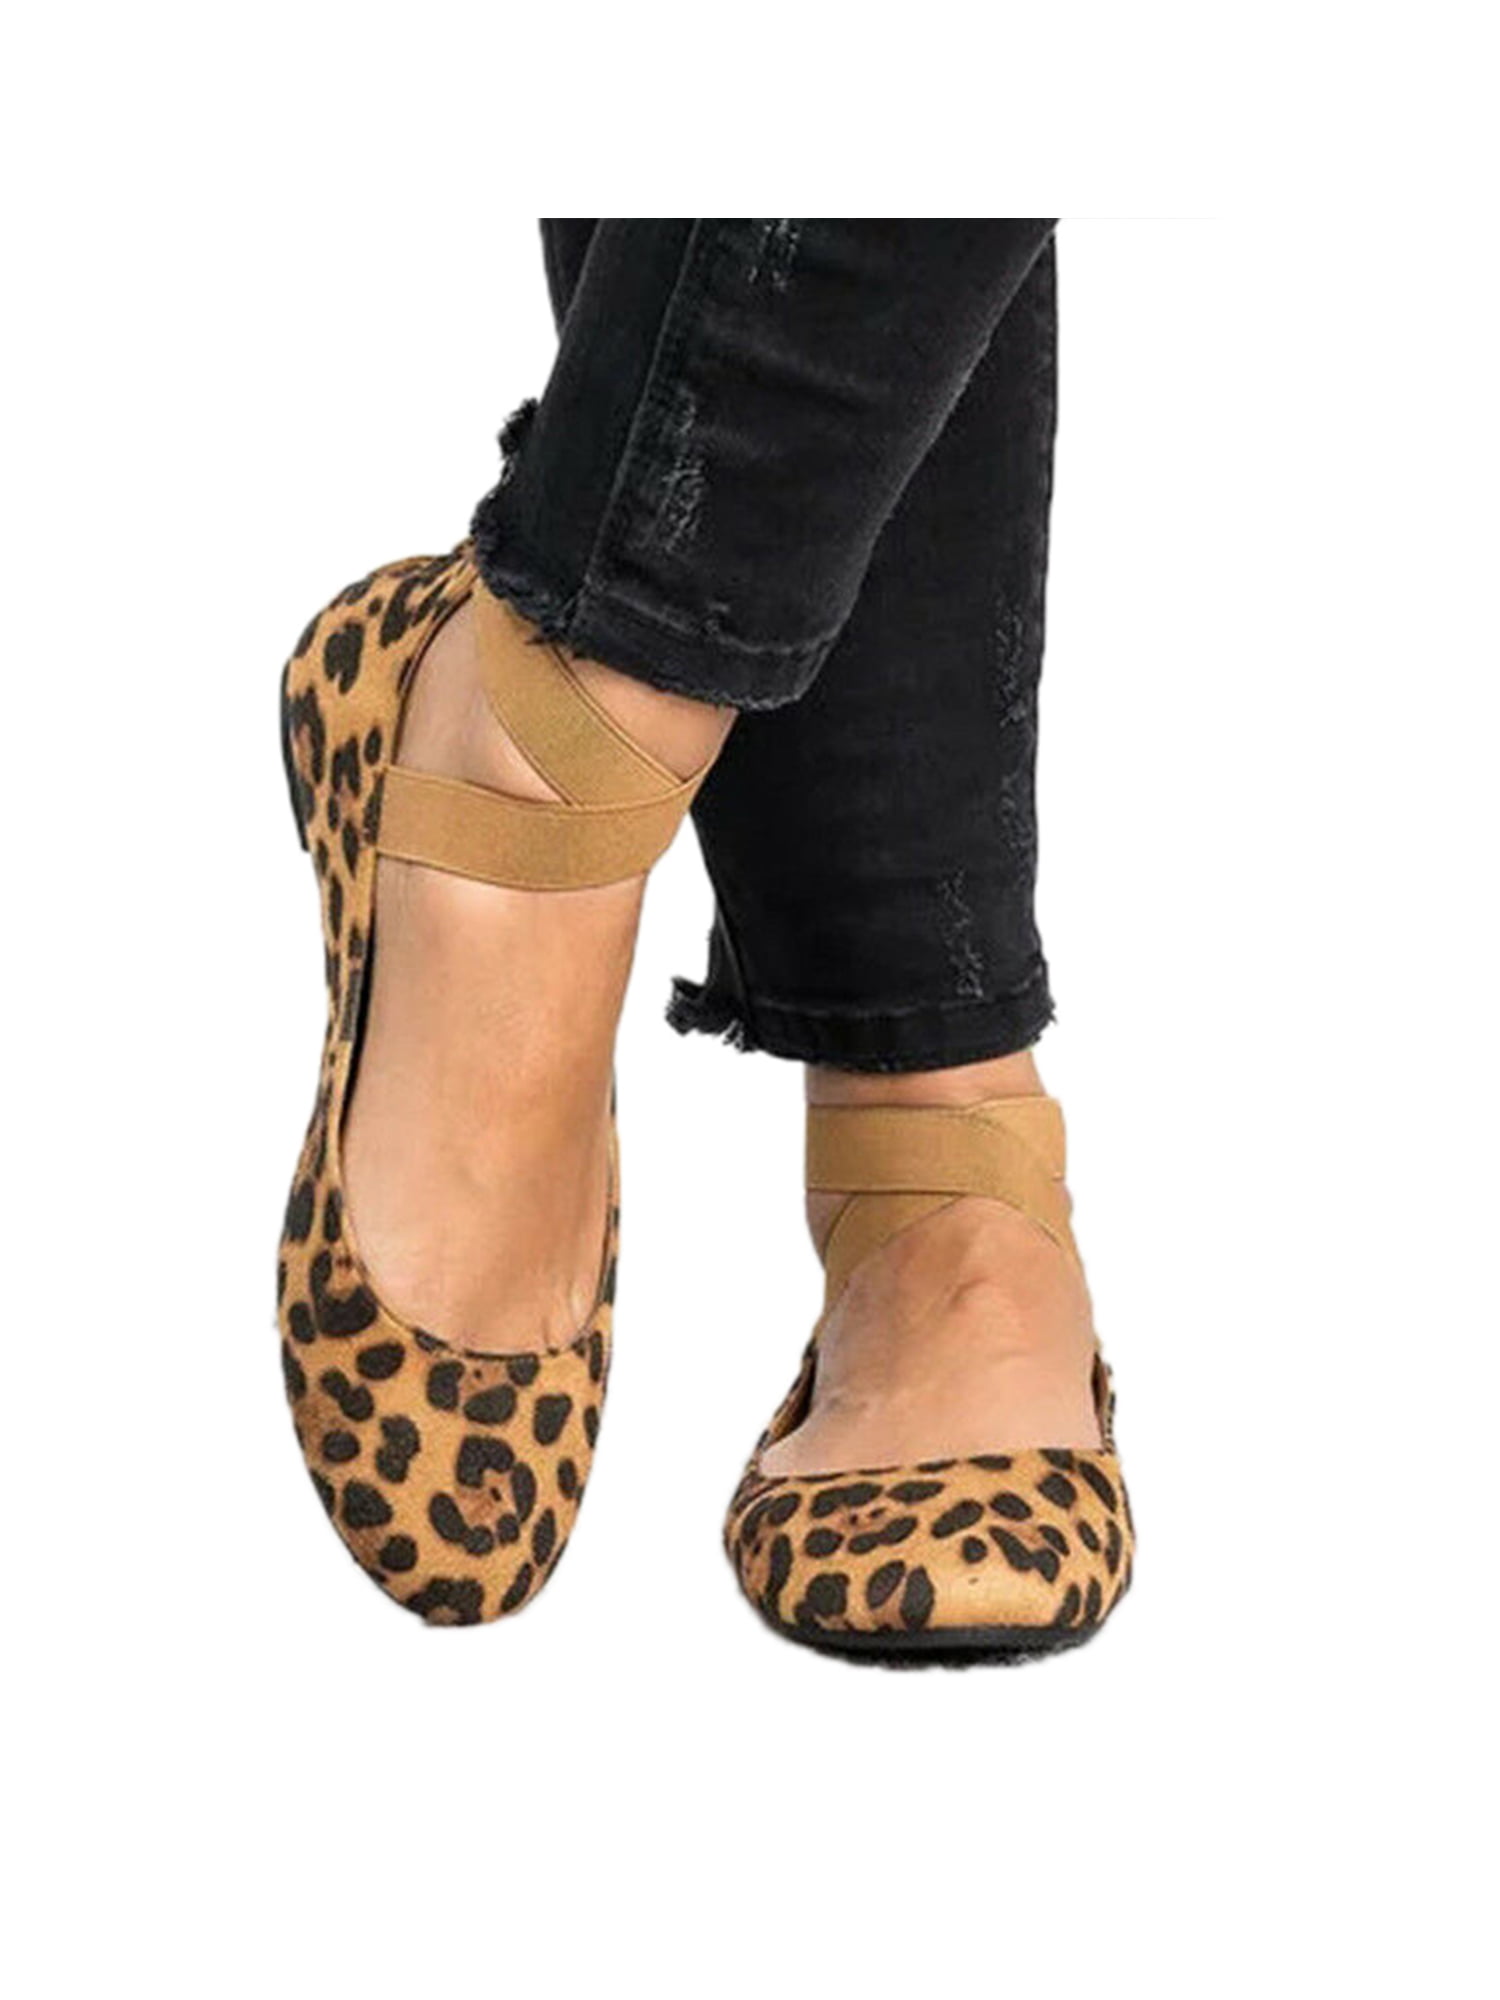 Women Leopard Printed Point Toe Slipper Flat Sandals Dolly Shoes Casual Slider H 